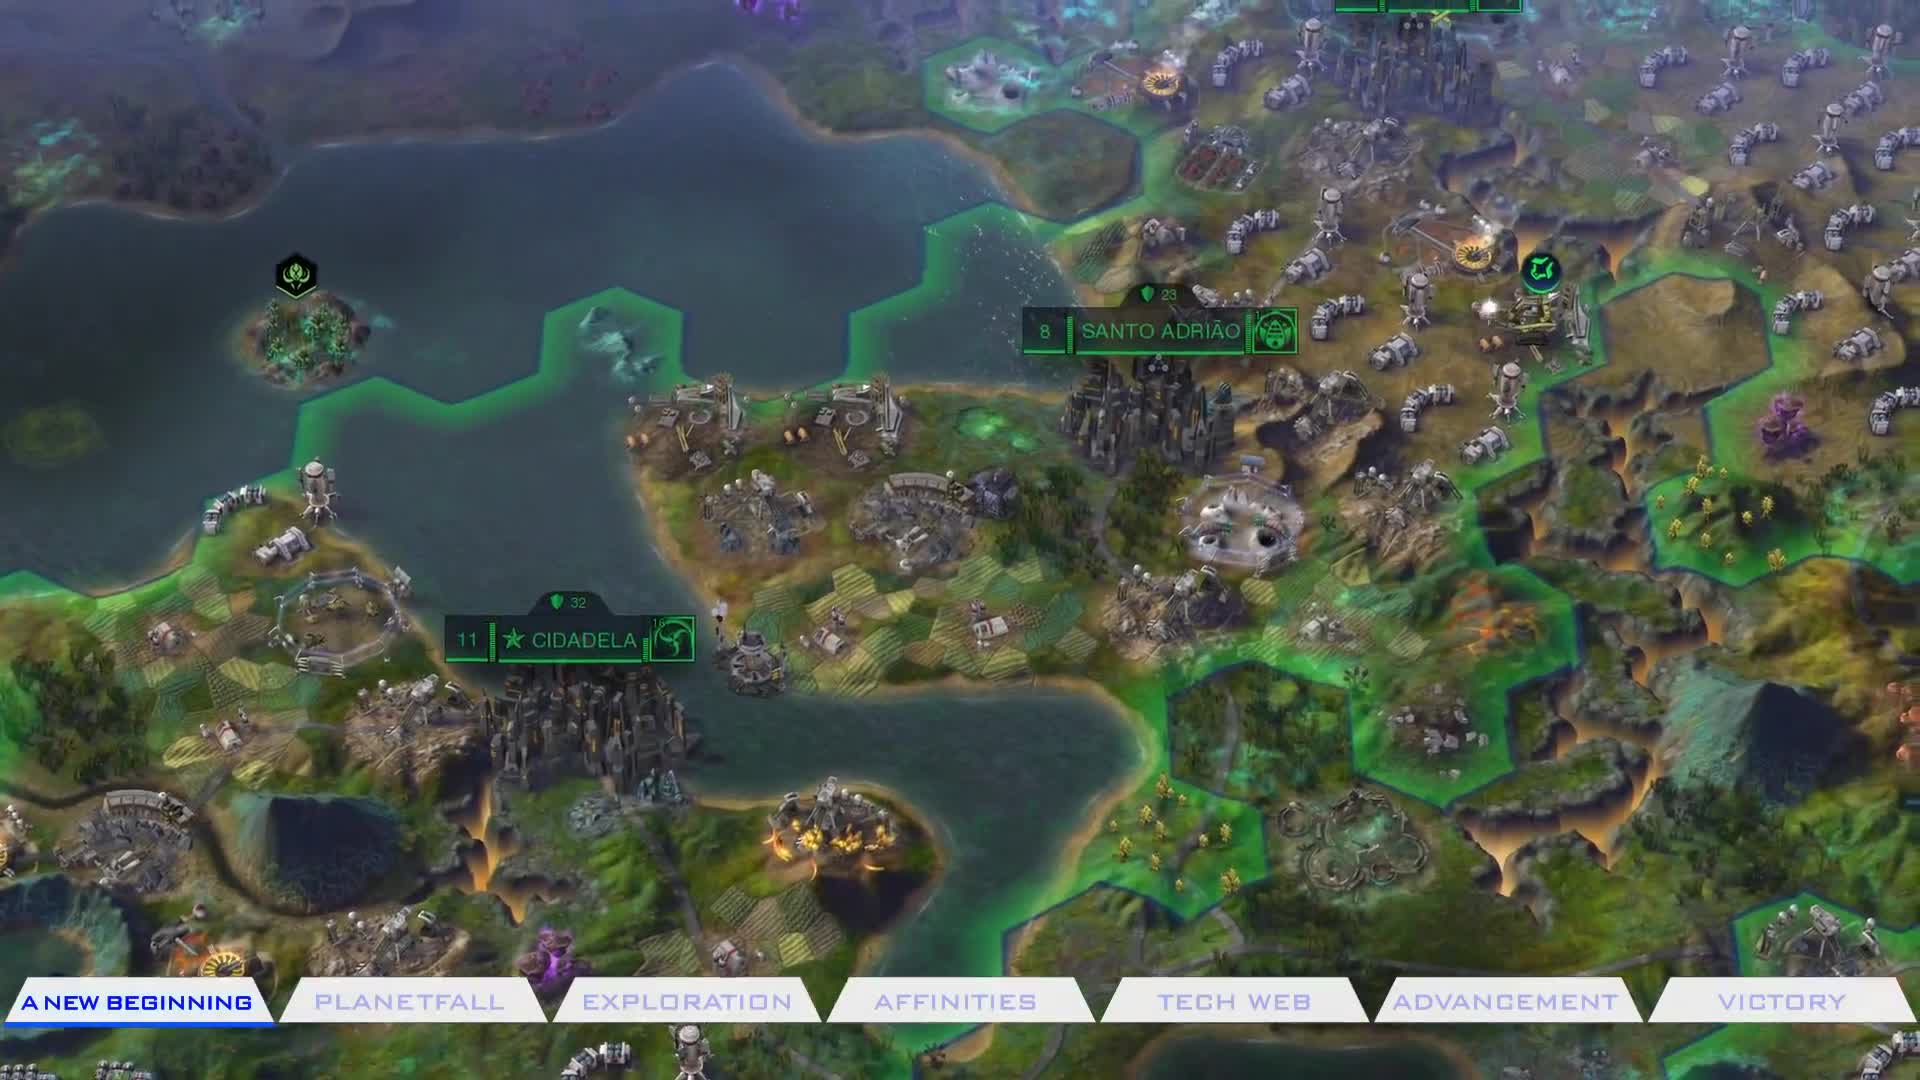 Civilization: Beyond Earth - 'Discovery' gameplay video